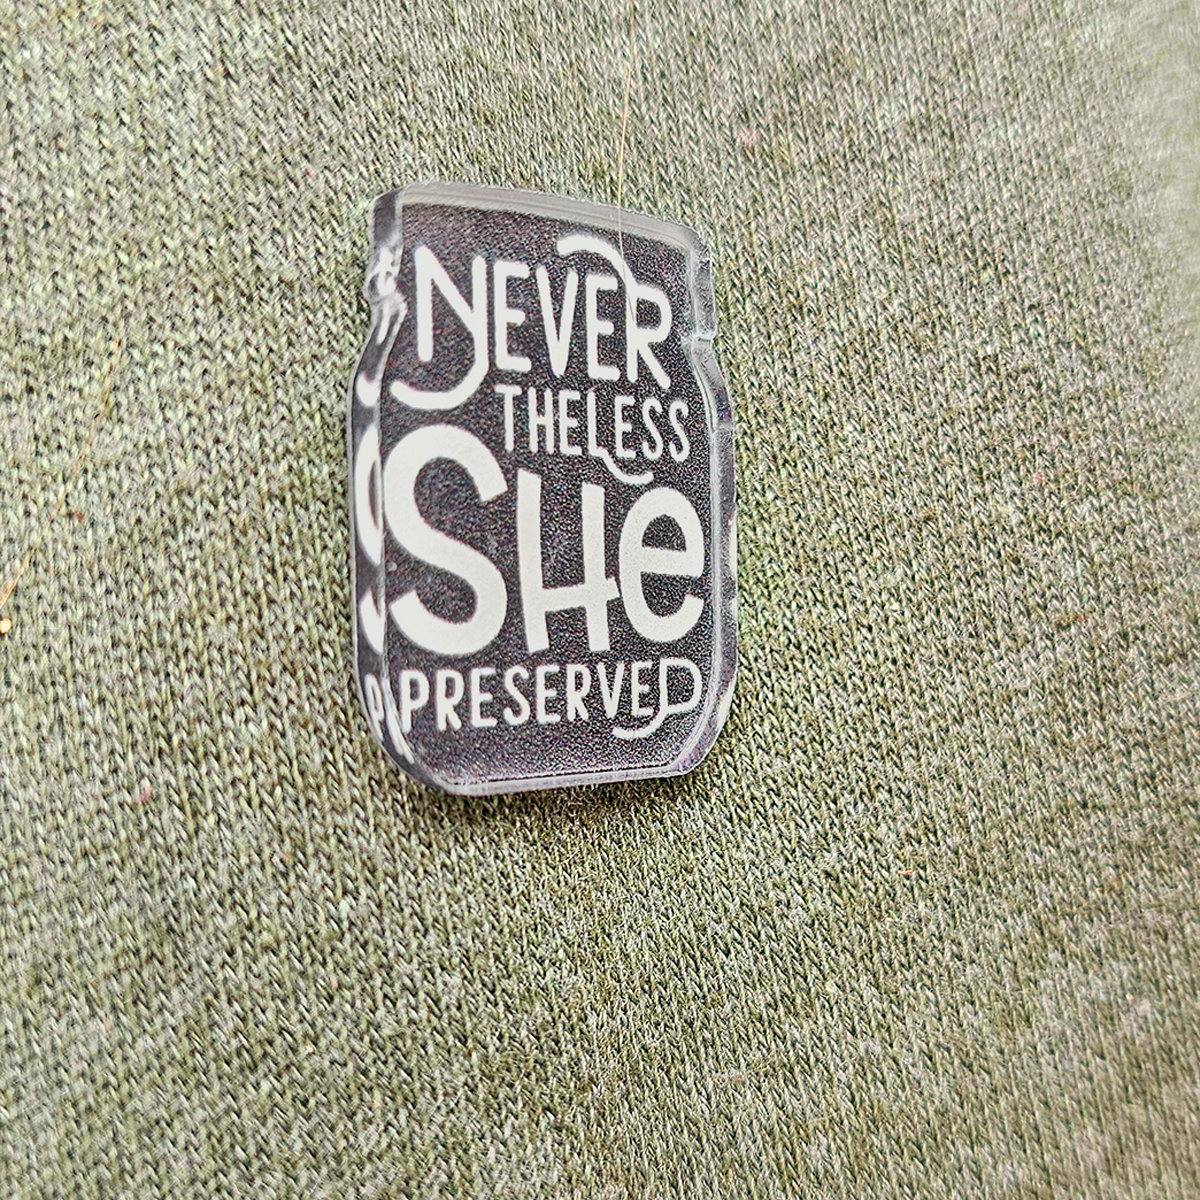 The hobby of pin preservation showcases The Purposeful Pantry's Nevertheless She Preserved Pin.